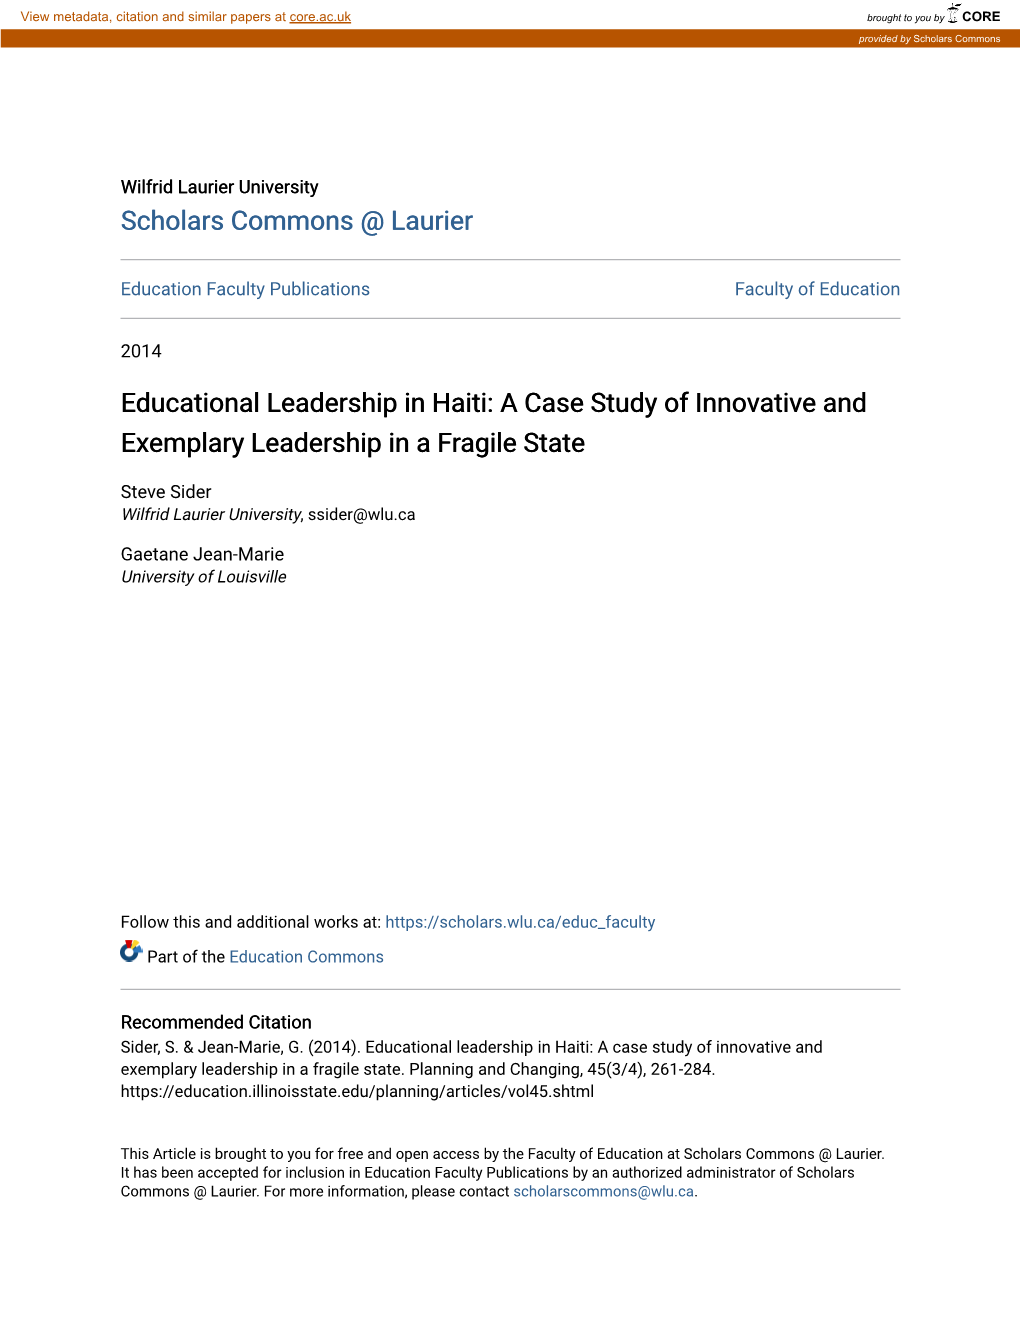 Educational Leadership in Haiti: a Case Study of Innovative and Exemplary Leadership in a Fragile State